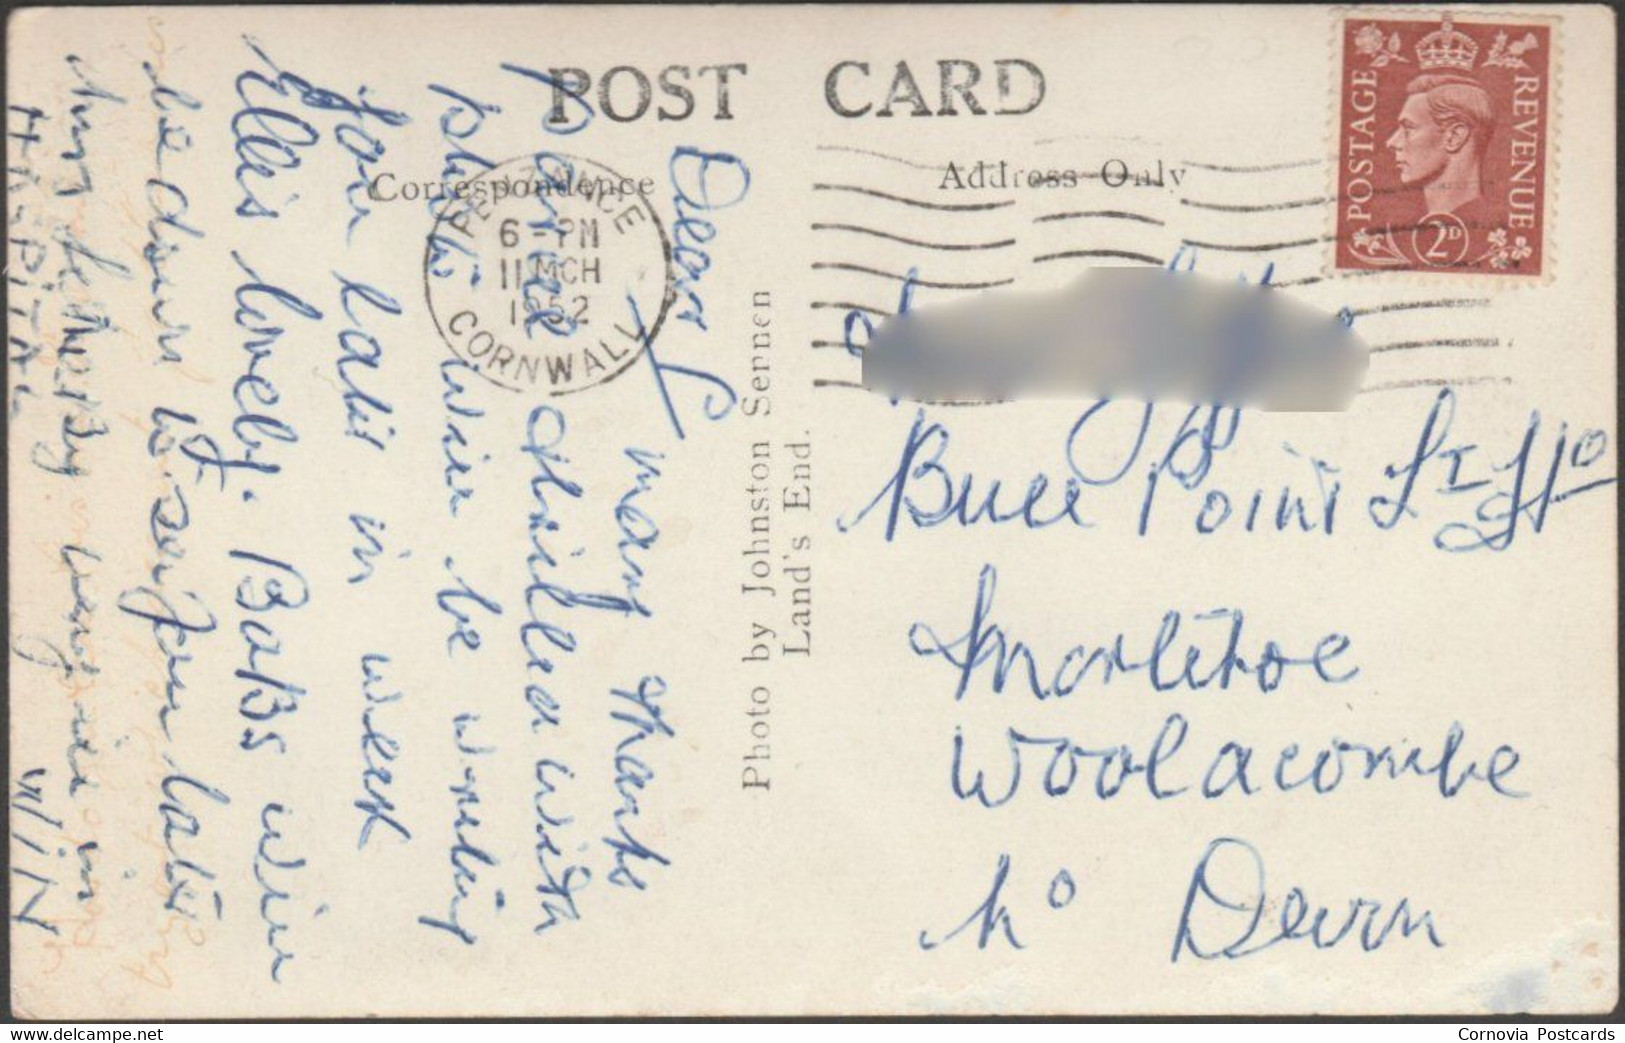 Greetings From Land's End, Cornwall, 1952 - Johnston RP Postcard - Land's End